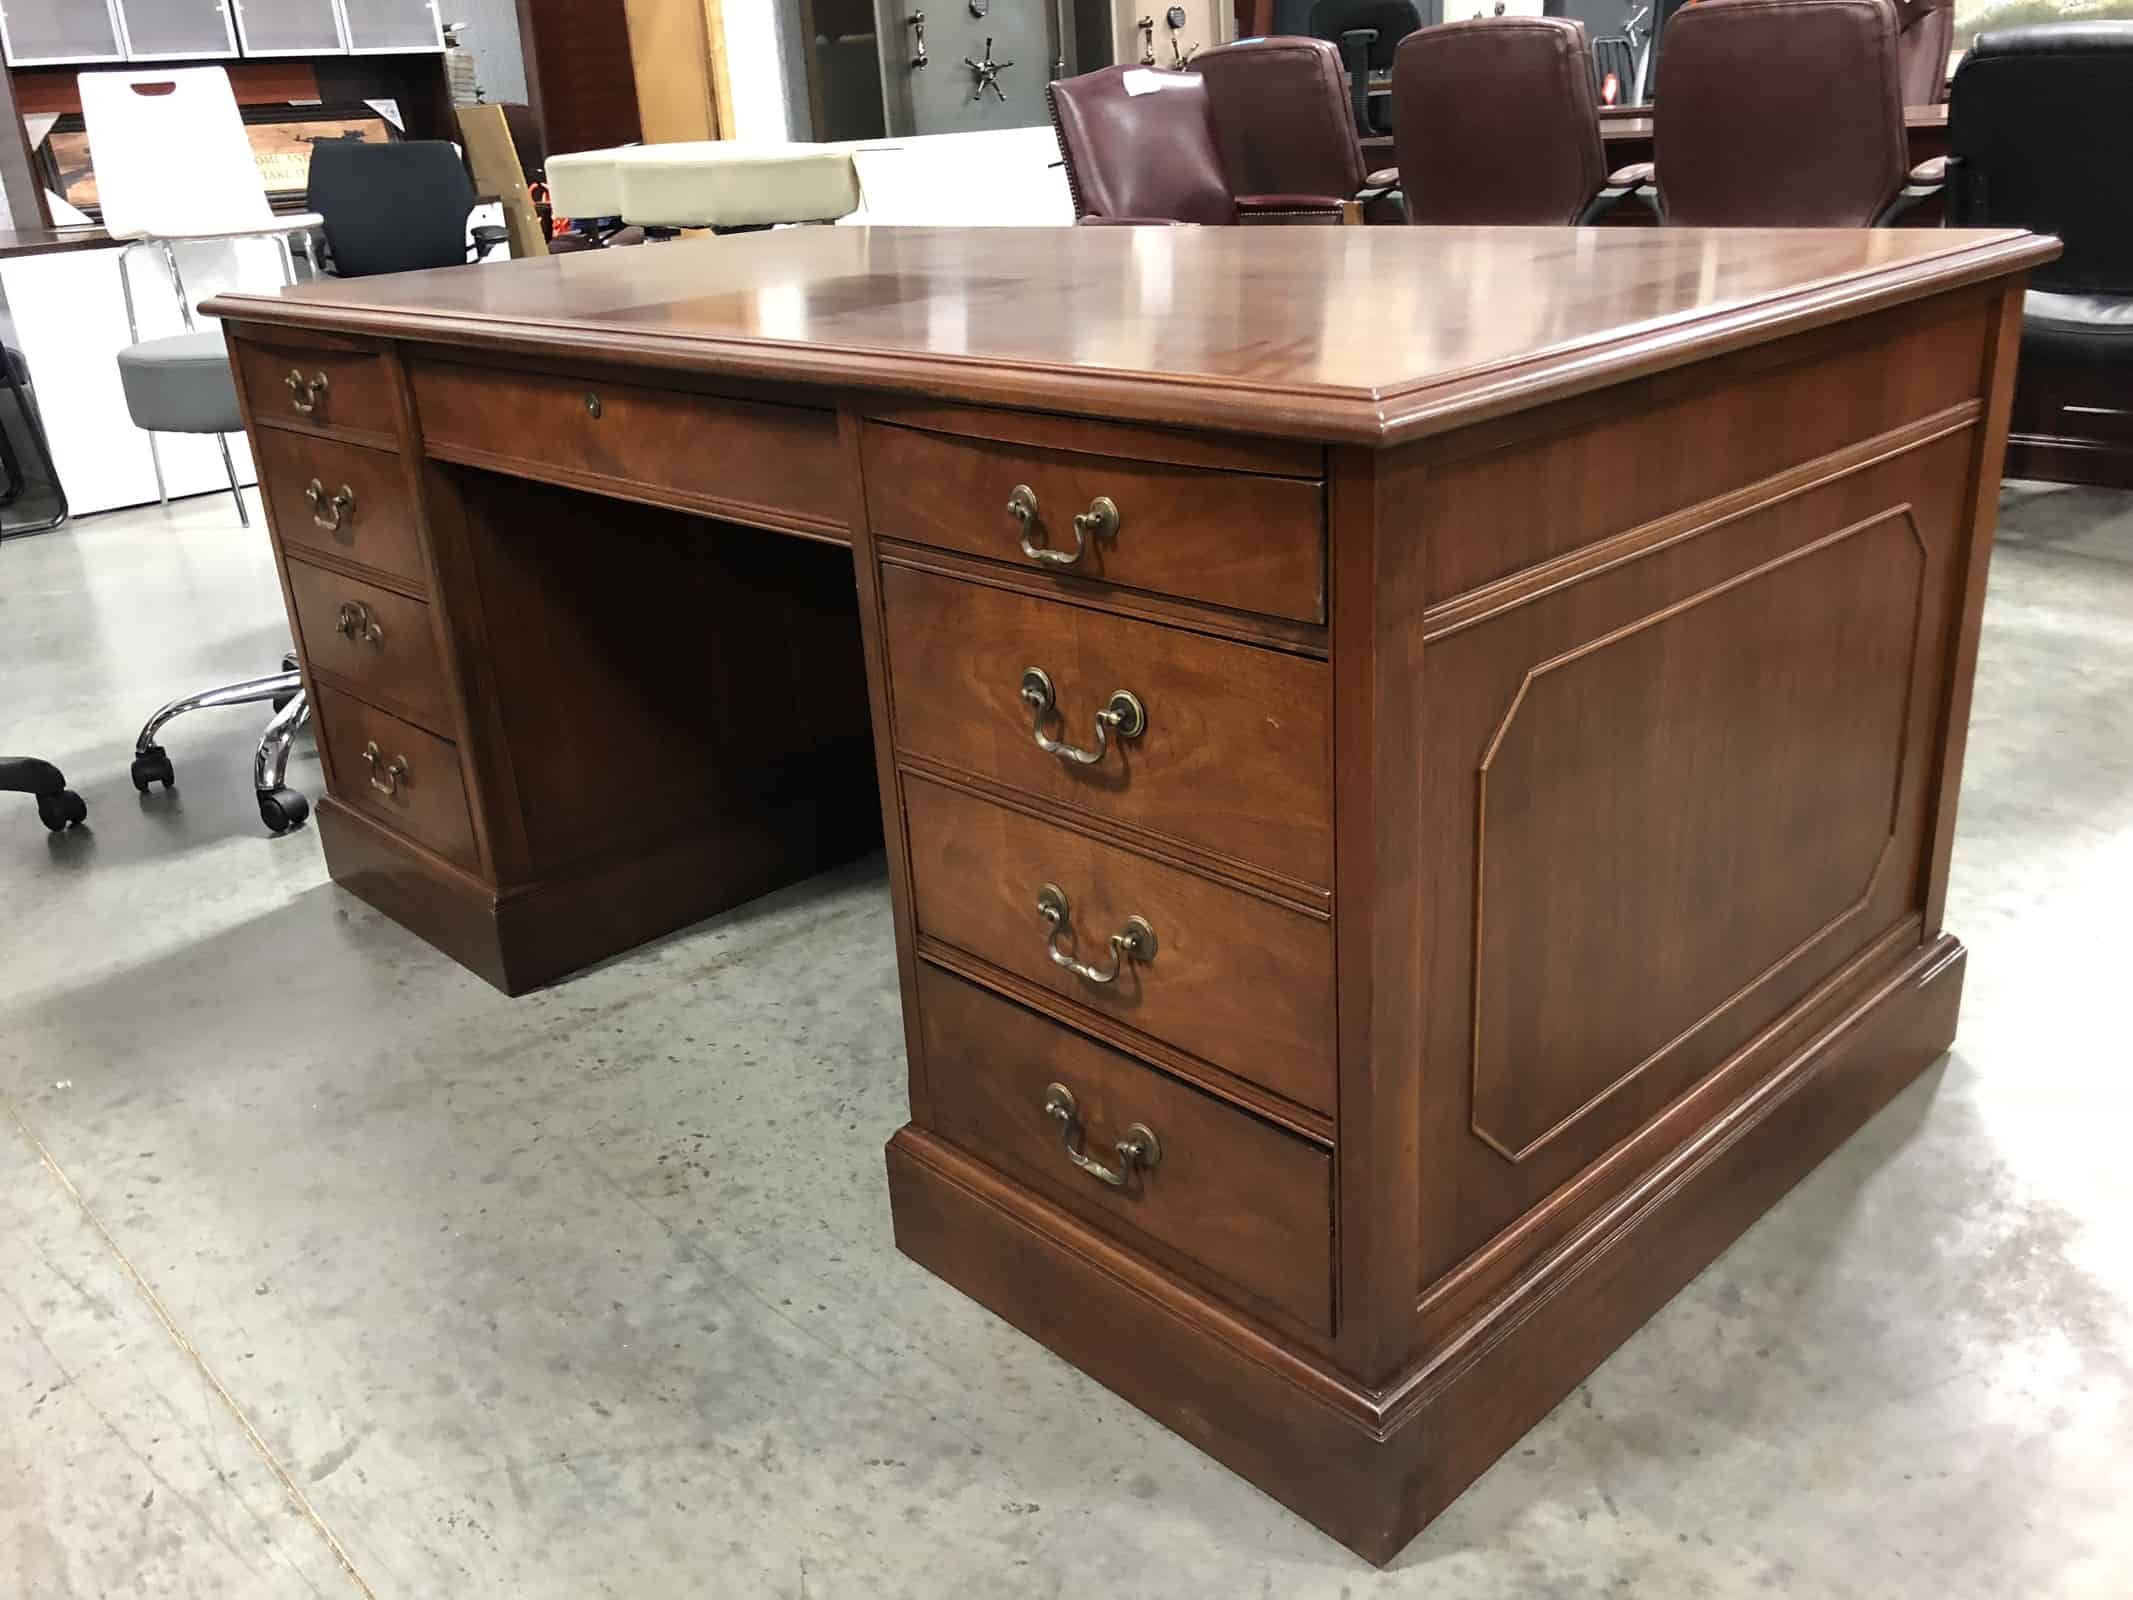 Jasper Desk & Credenza Set | Office Barn With Office Desks With Filing Credenza (View 2 of 15)